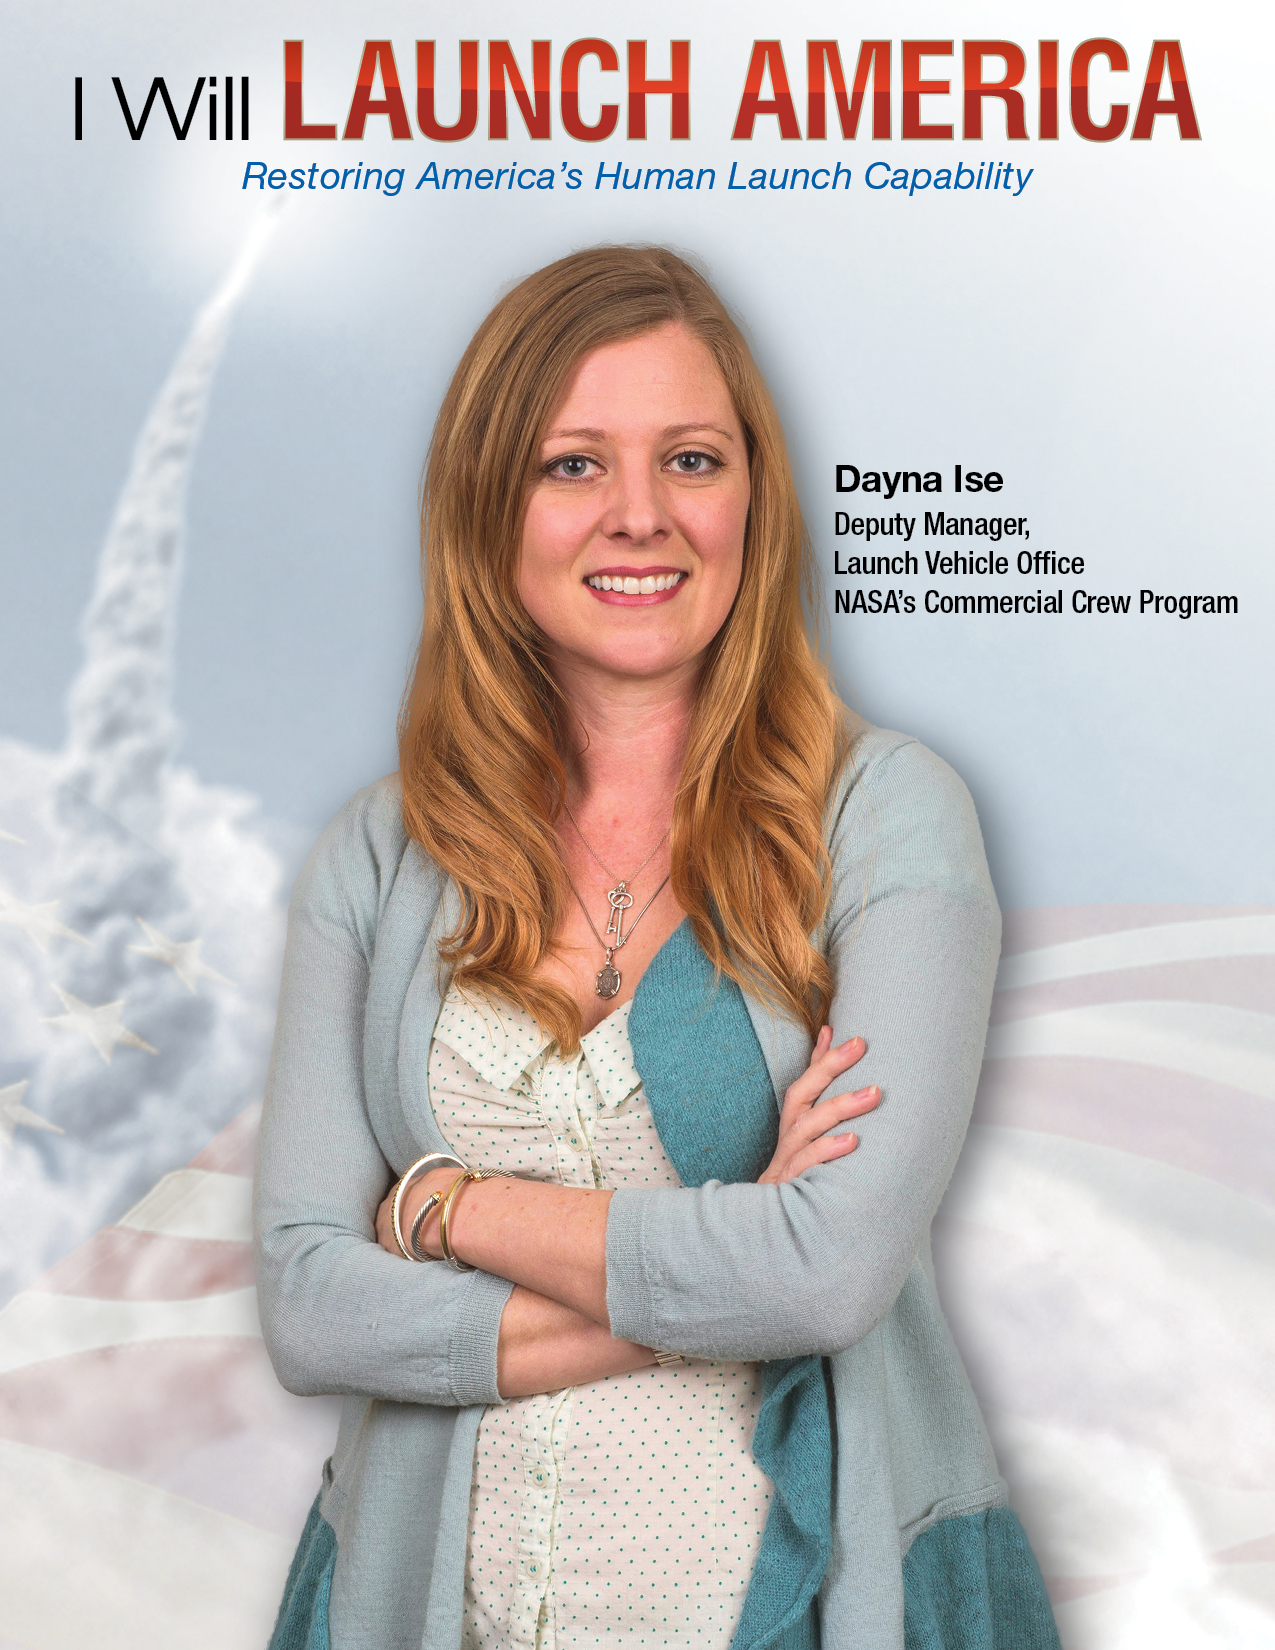 Dayna Ise, Deputy Manager, Launch Vehicle Office, NASA's Commercial Crew Program